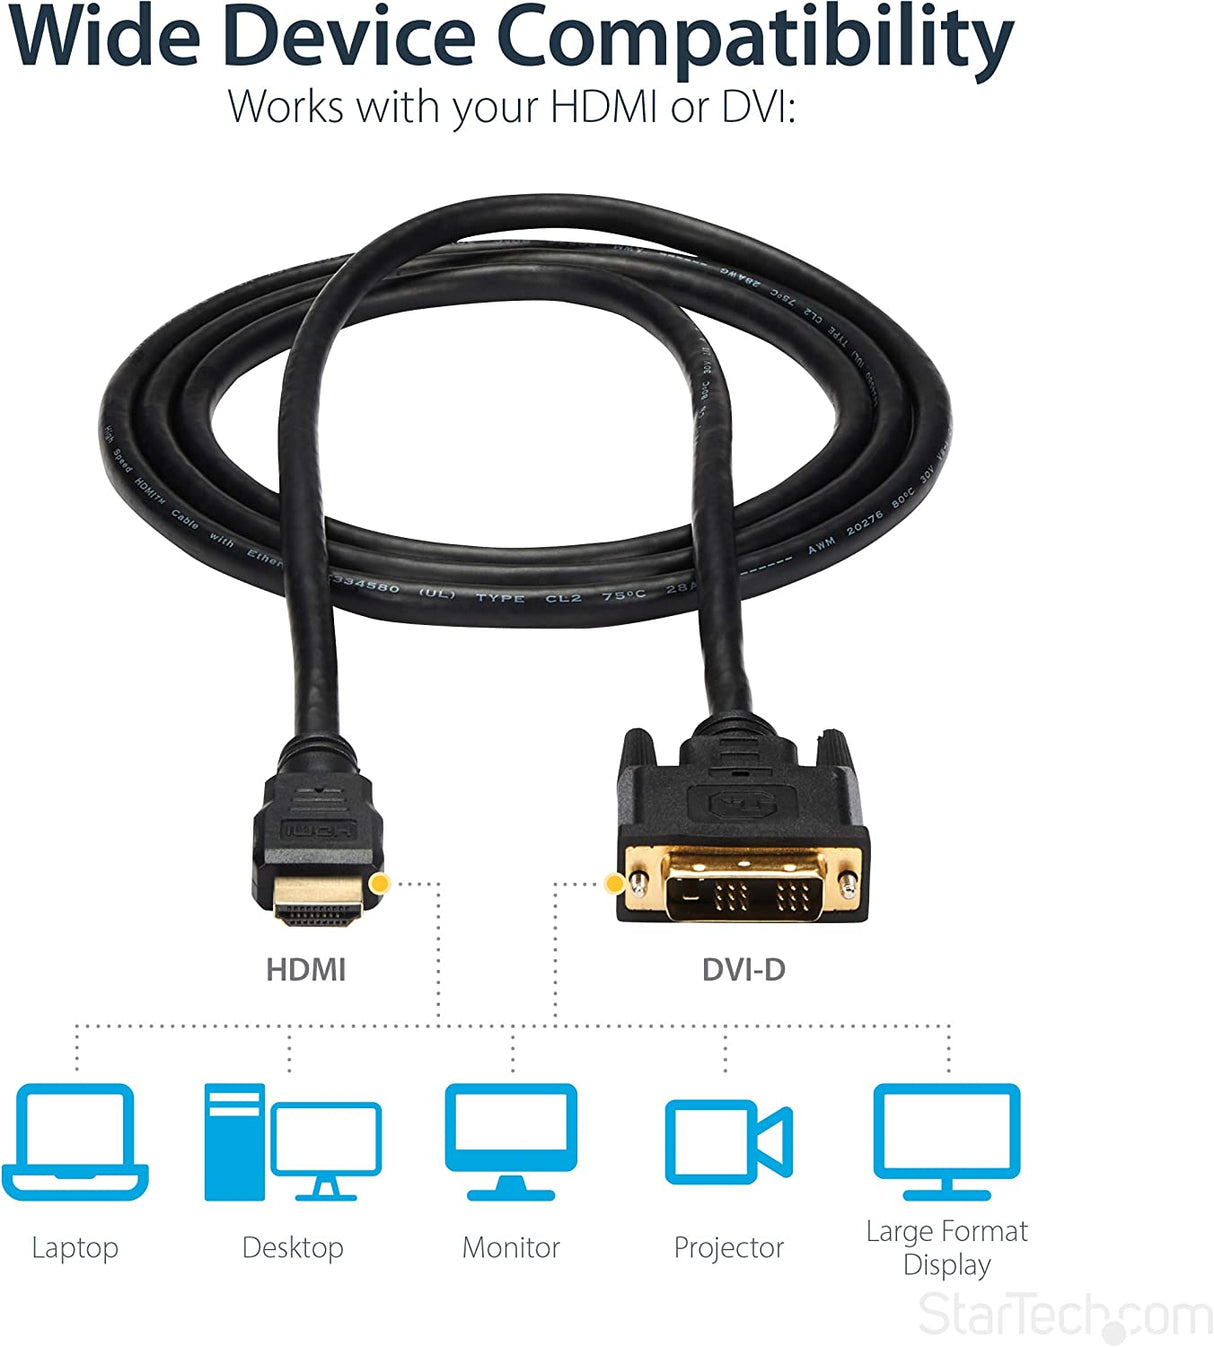 StarTech.com 6ft HDMI to DVI D Adapter Cable - Bi-Directional - HDMI to DVI or DVI to HDMI Adapter for Your Computer Monitor (HDMIDVIMM6) 6 ft / 2 m Standard Packaging